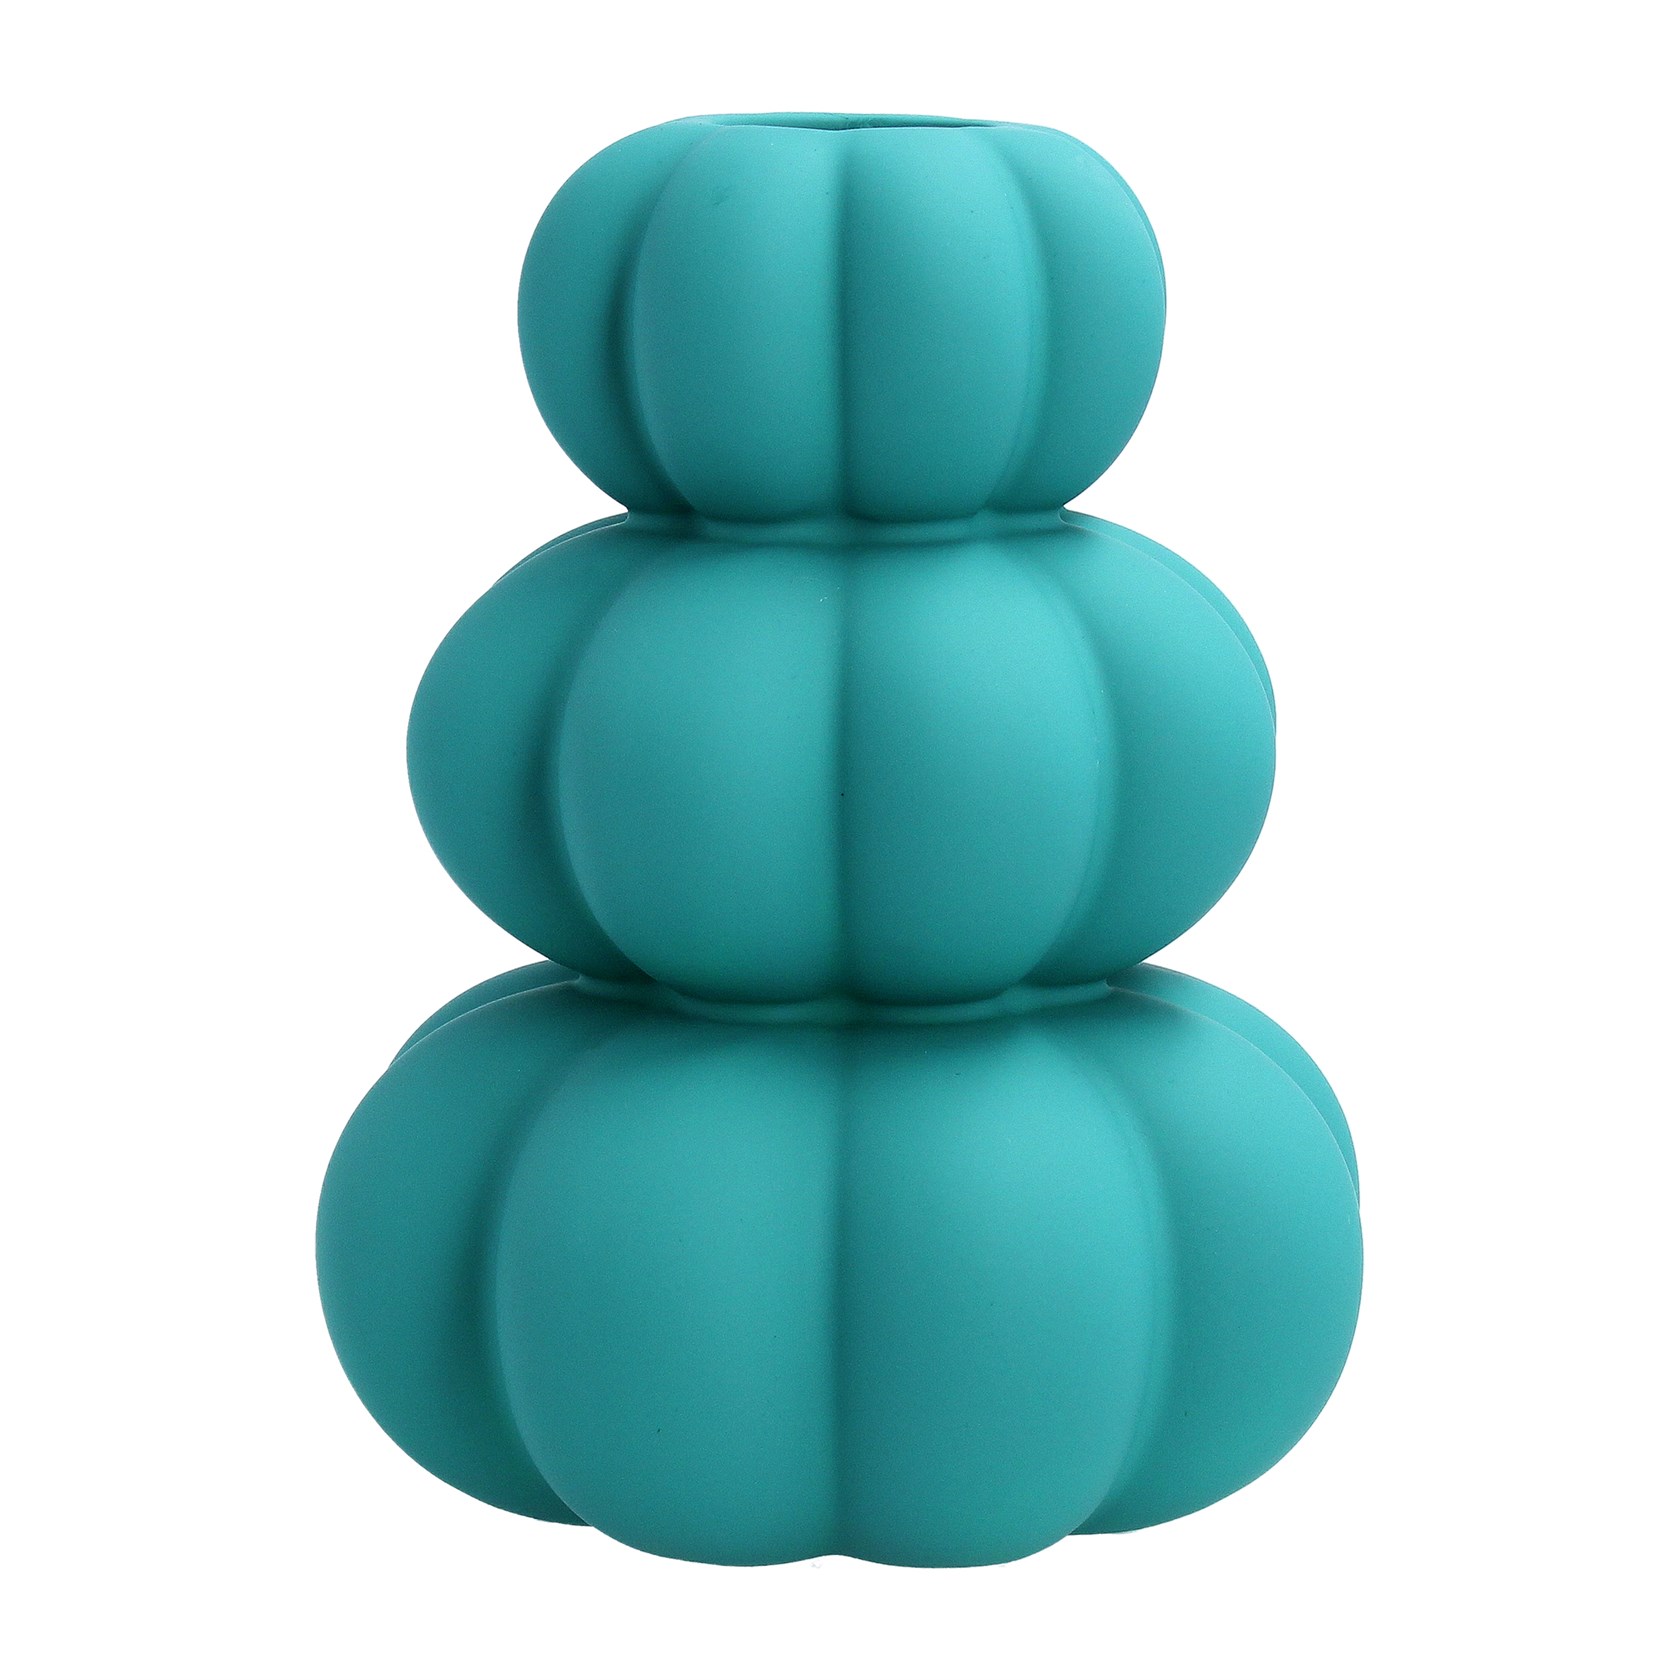 A turquoise stacked ceramic decorative vase. The perfect addition to your home or the perfect gift for yourself or a loved one. By London designer Gisela Graham.